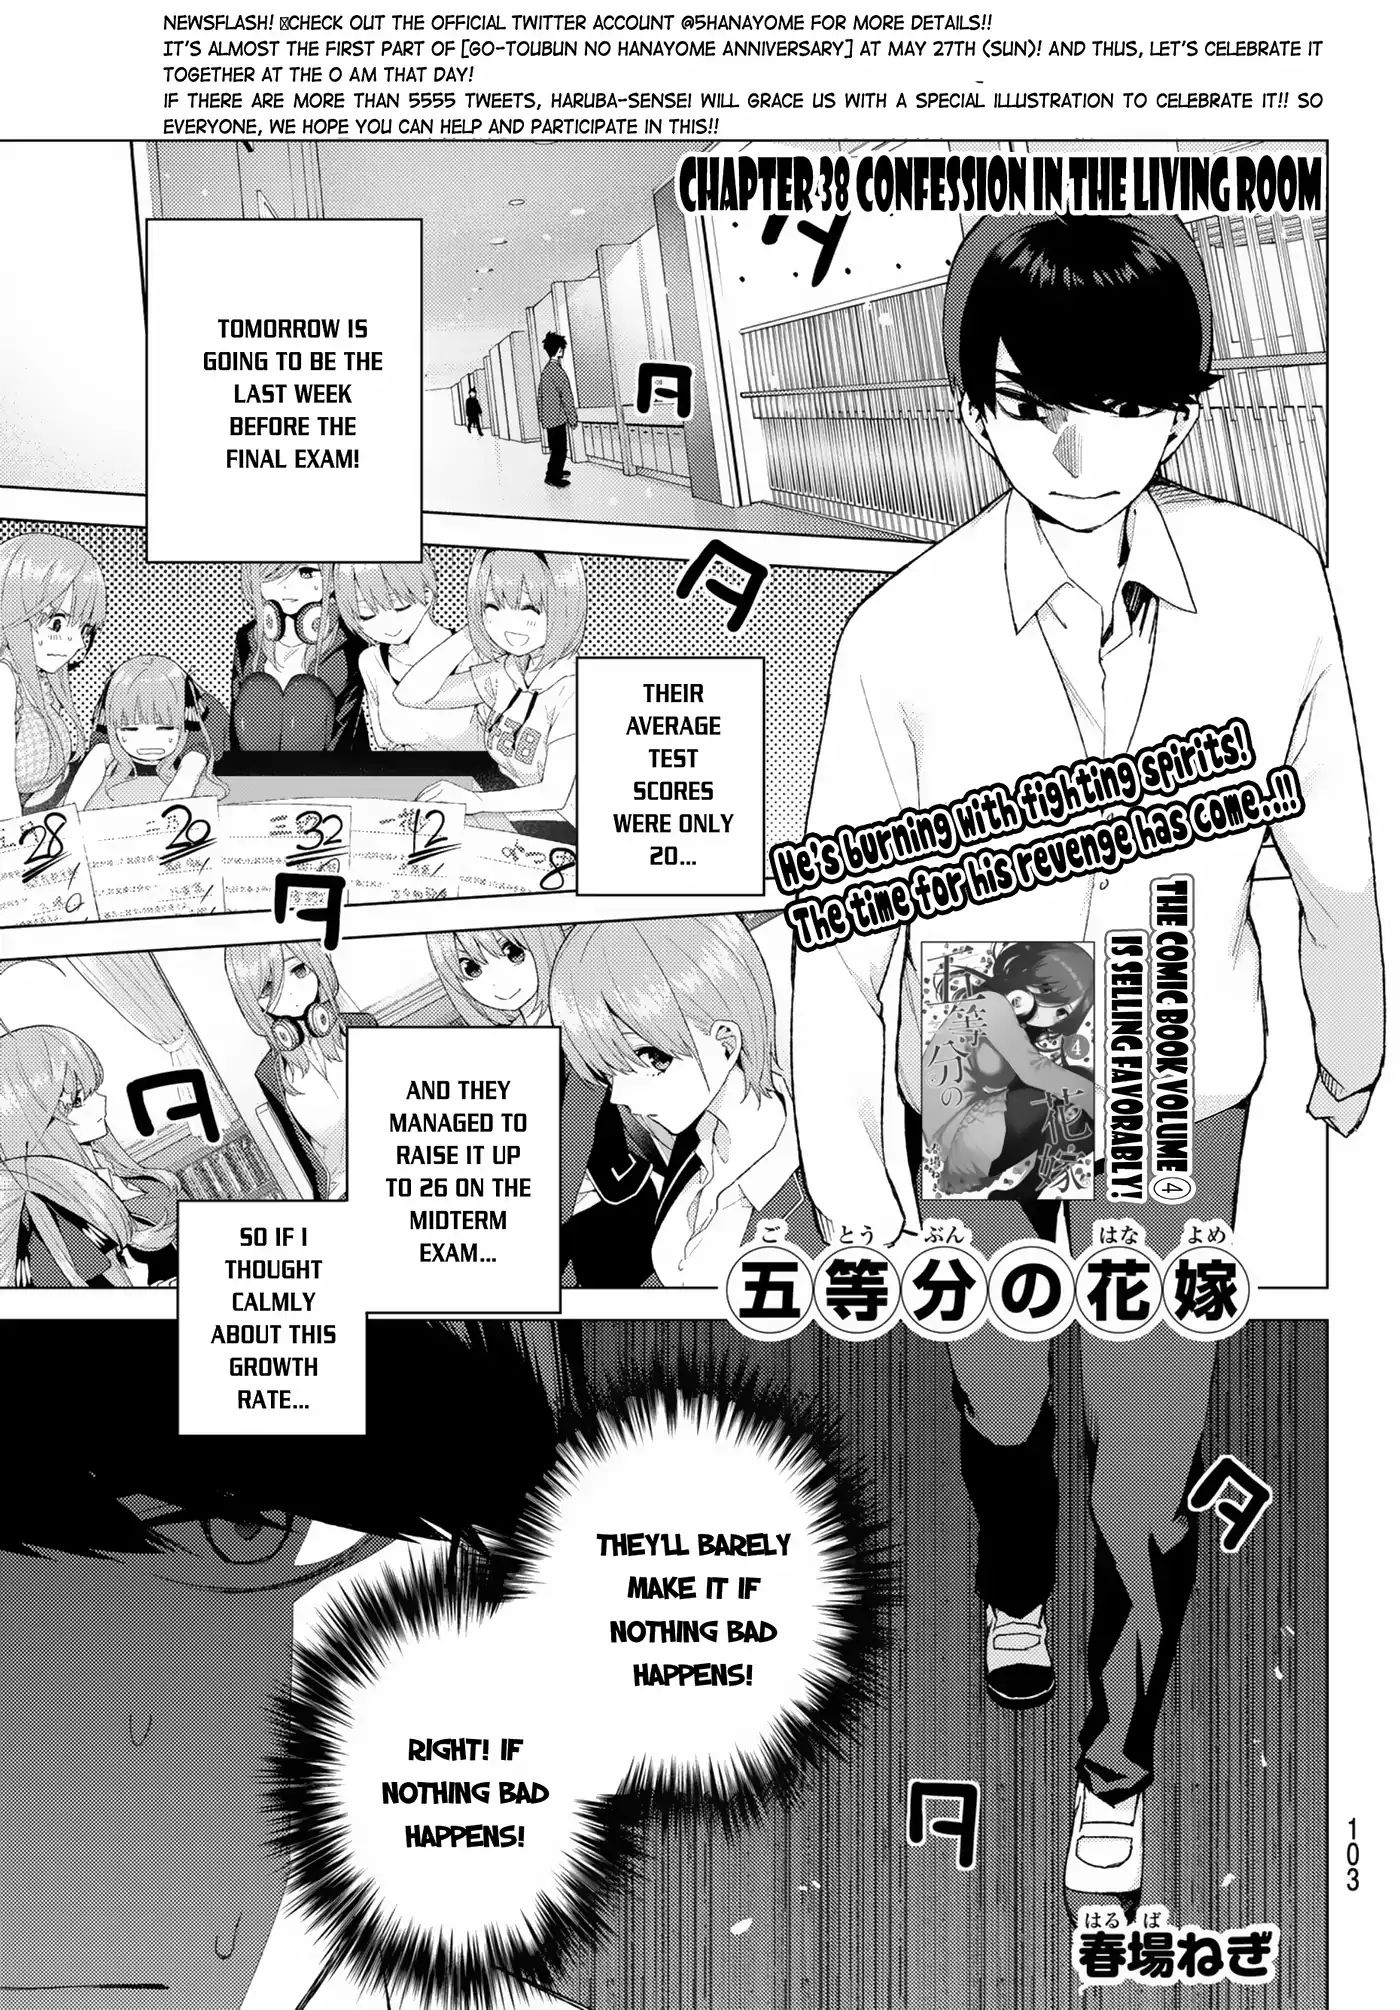 Go-Toubun No Hanayome Vol.5 Chapter 38: Confession In The Living Room - Picture 2